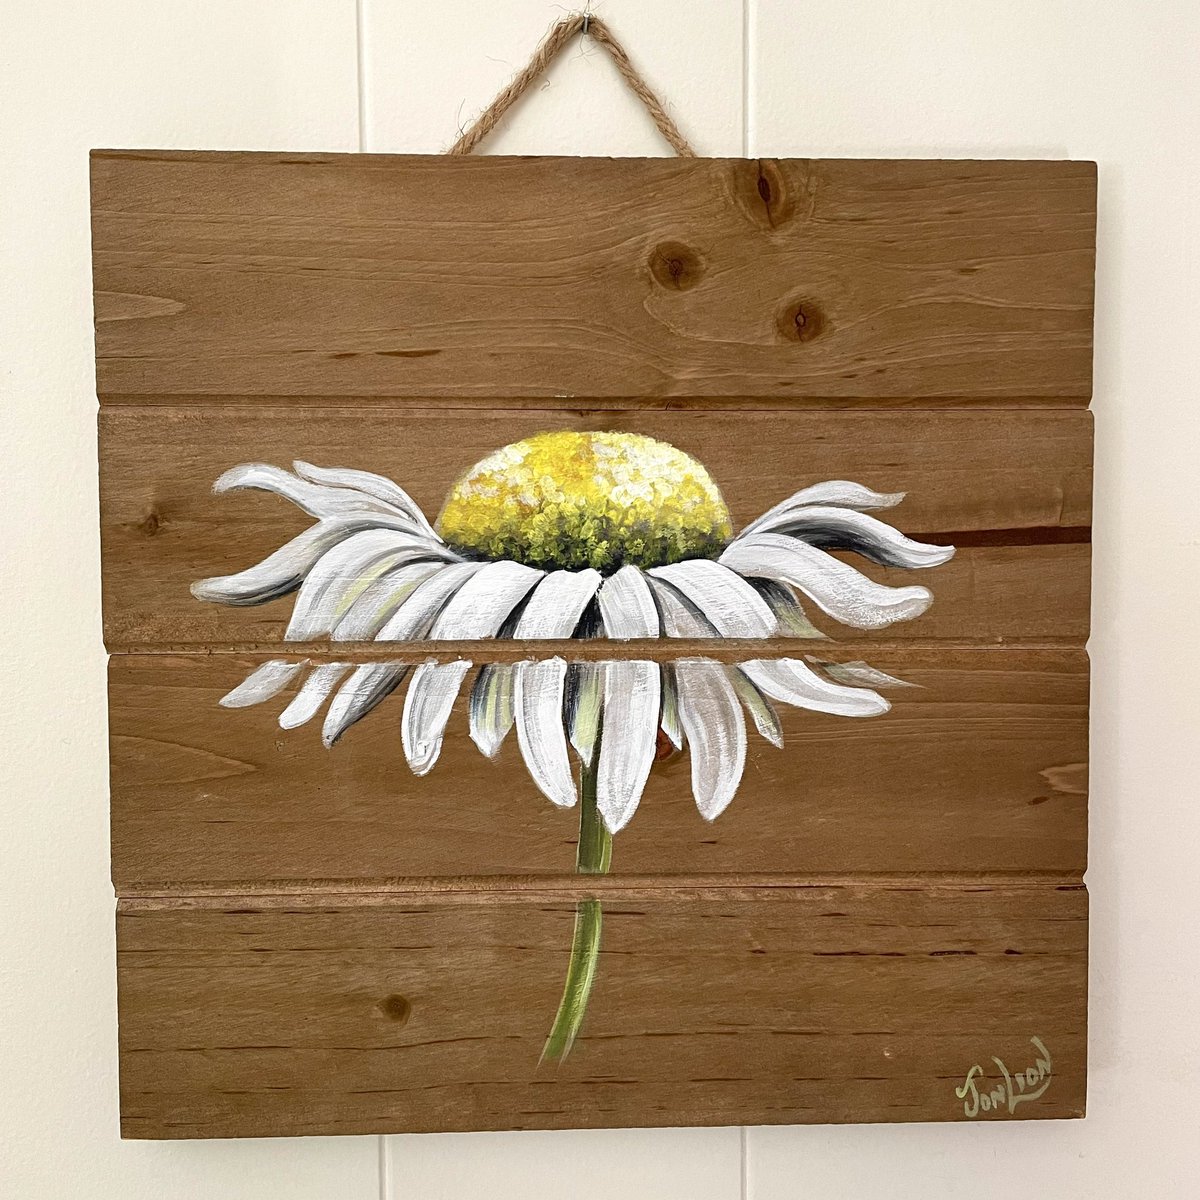 Super SALE: $125

Who wants it?

“Gnarly Daisy” - painted on 10x10 wood slats panel, ready to hang 

Message me if interested!